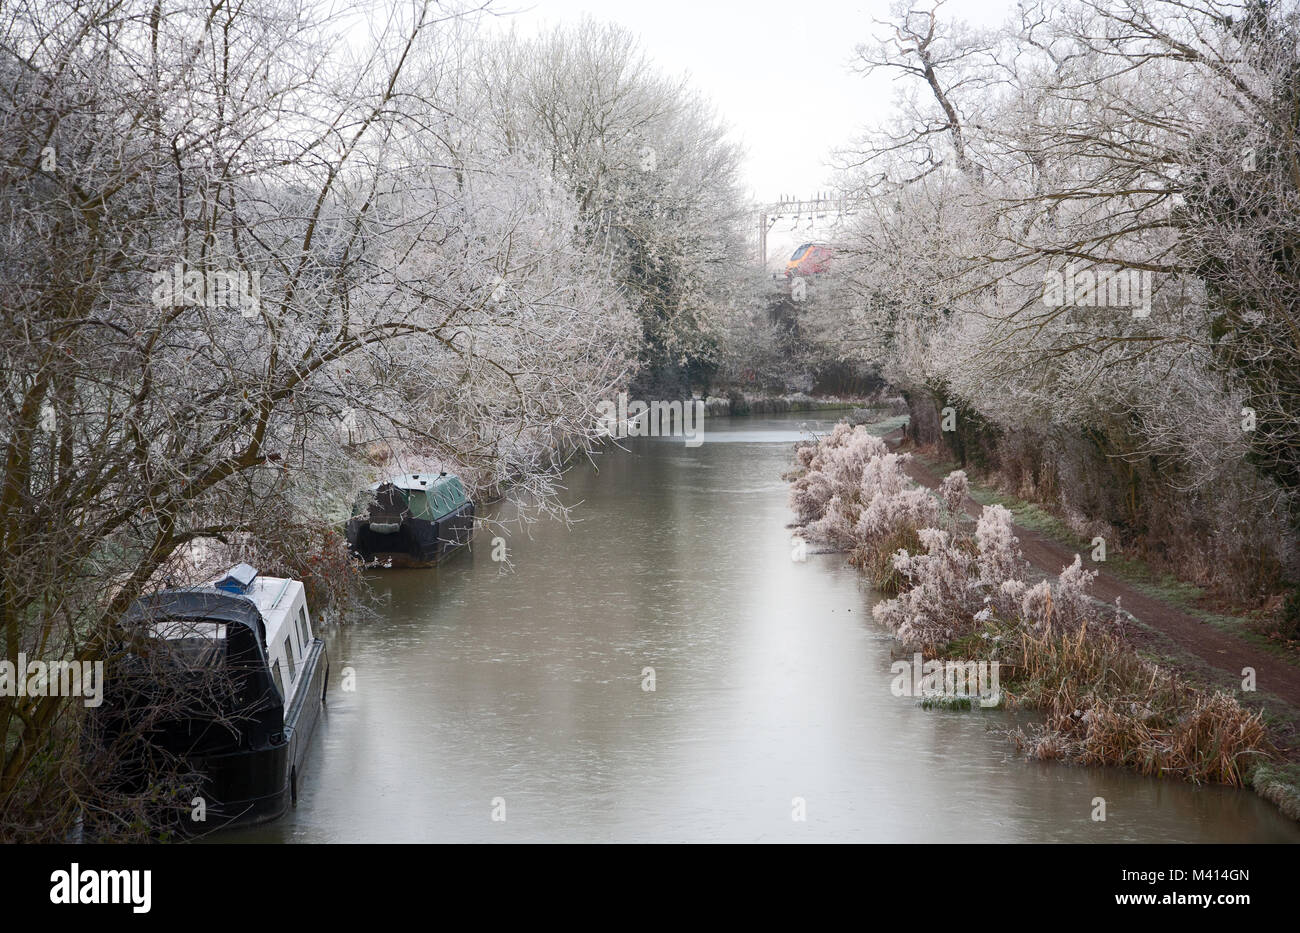 Narrowboats on the Grand Union Canal at Linslade, Bedfordshire, with hoar frost on nearby trees and a red train in the background. Stock Photo